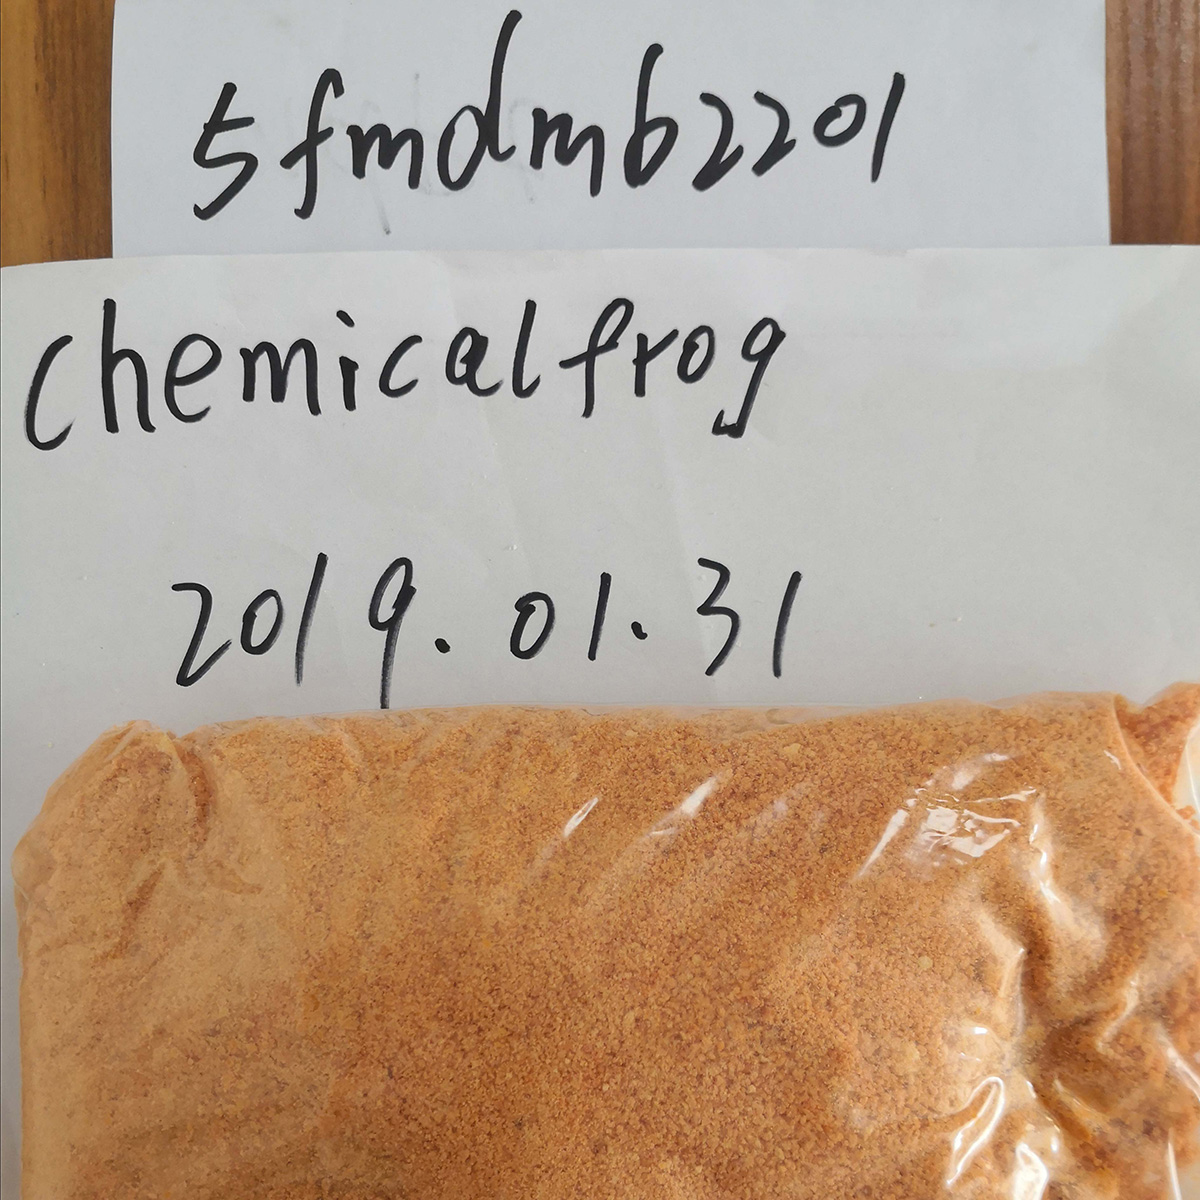 Buy 5F-MDMB-2201 Online, Dierct from China to USA, EU, UK